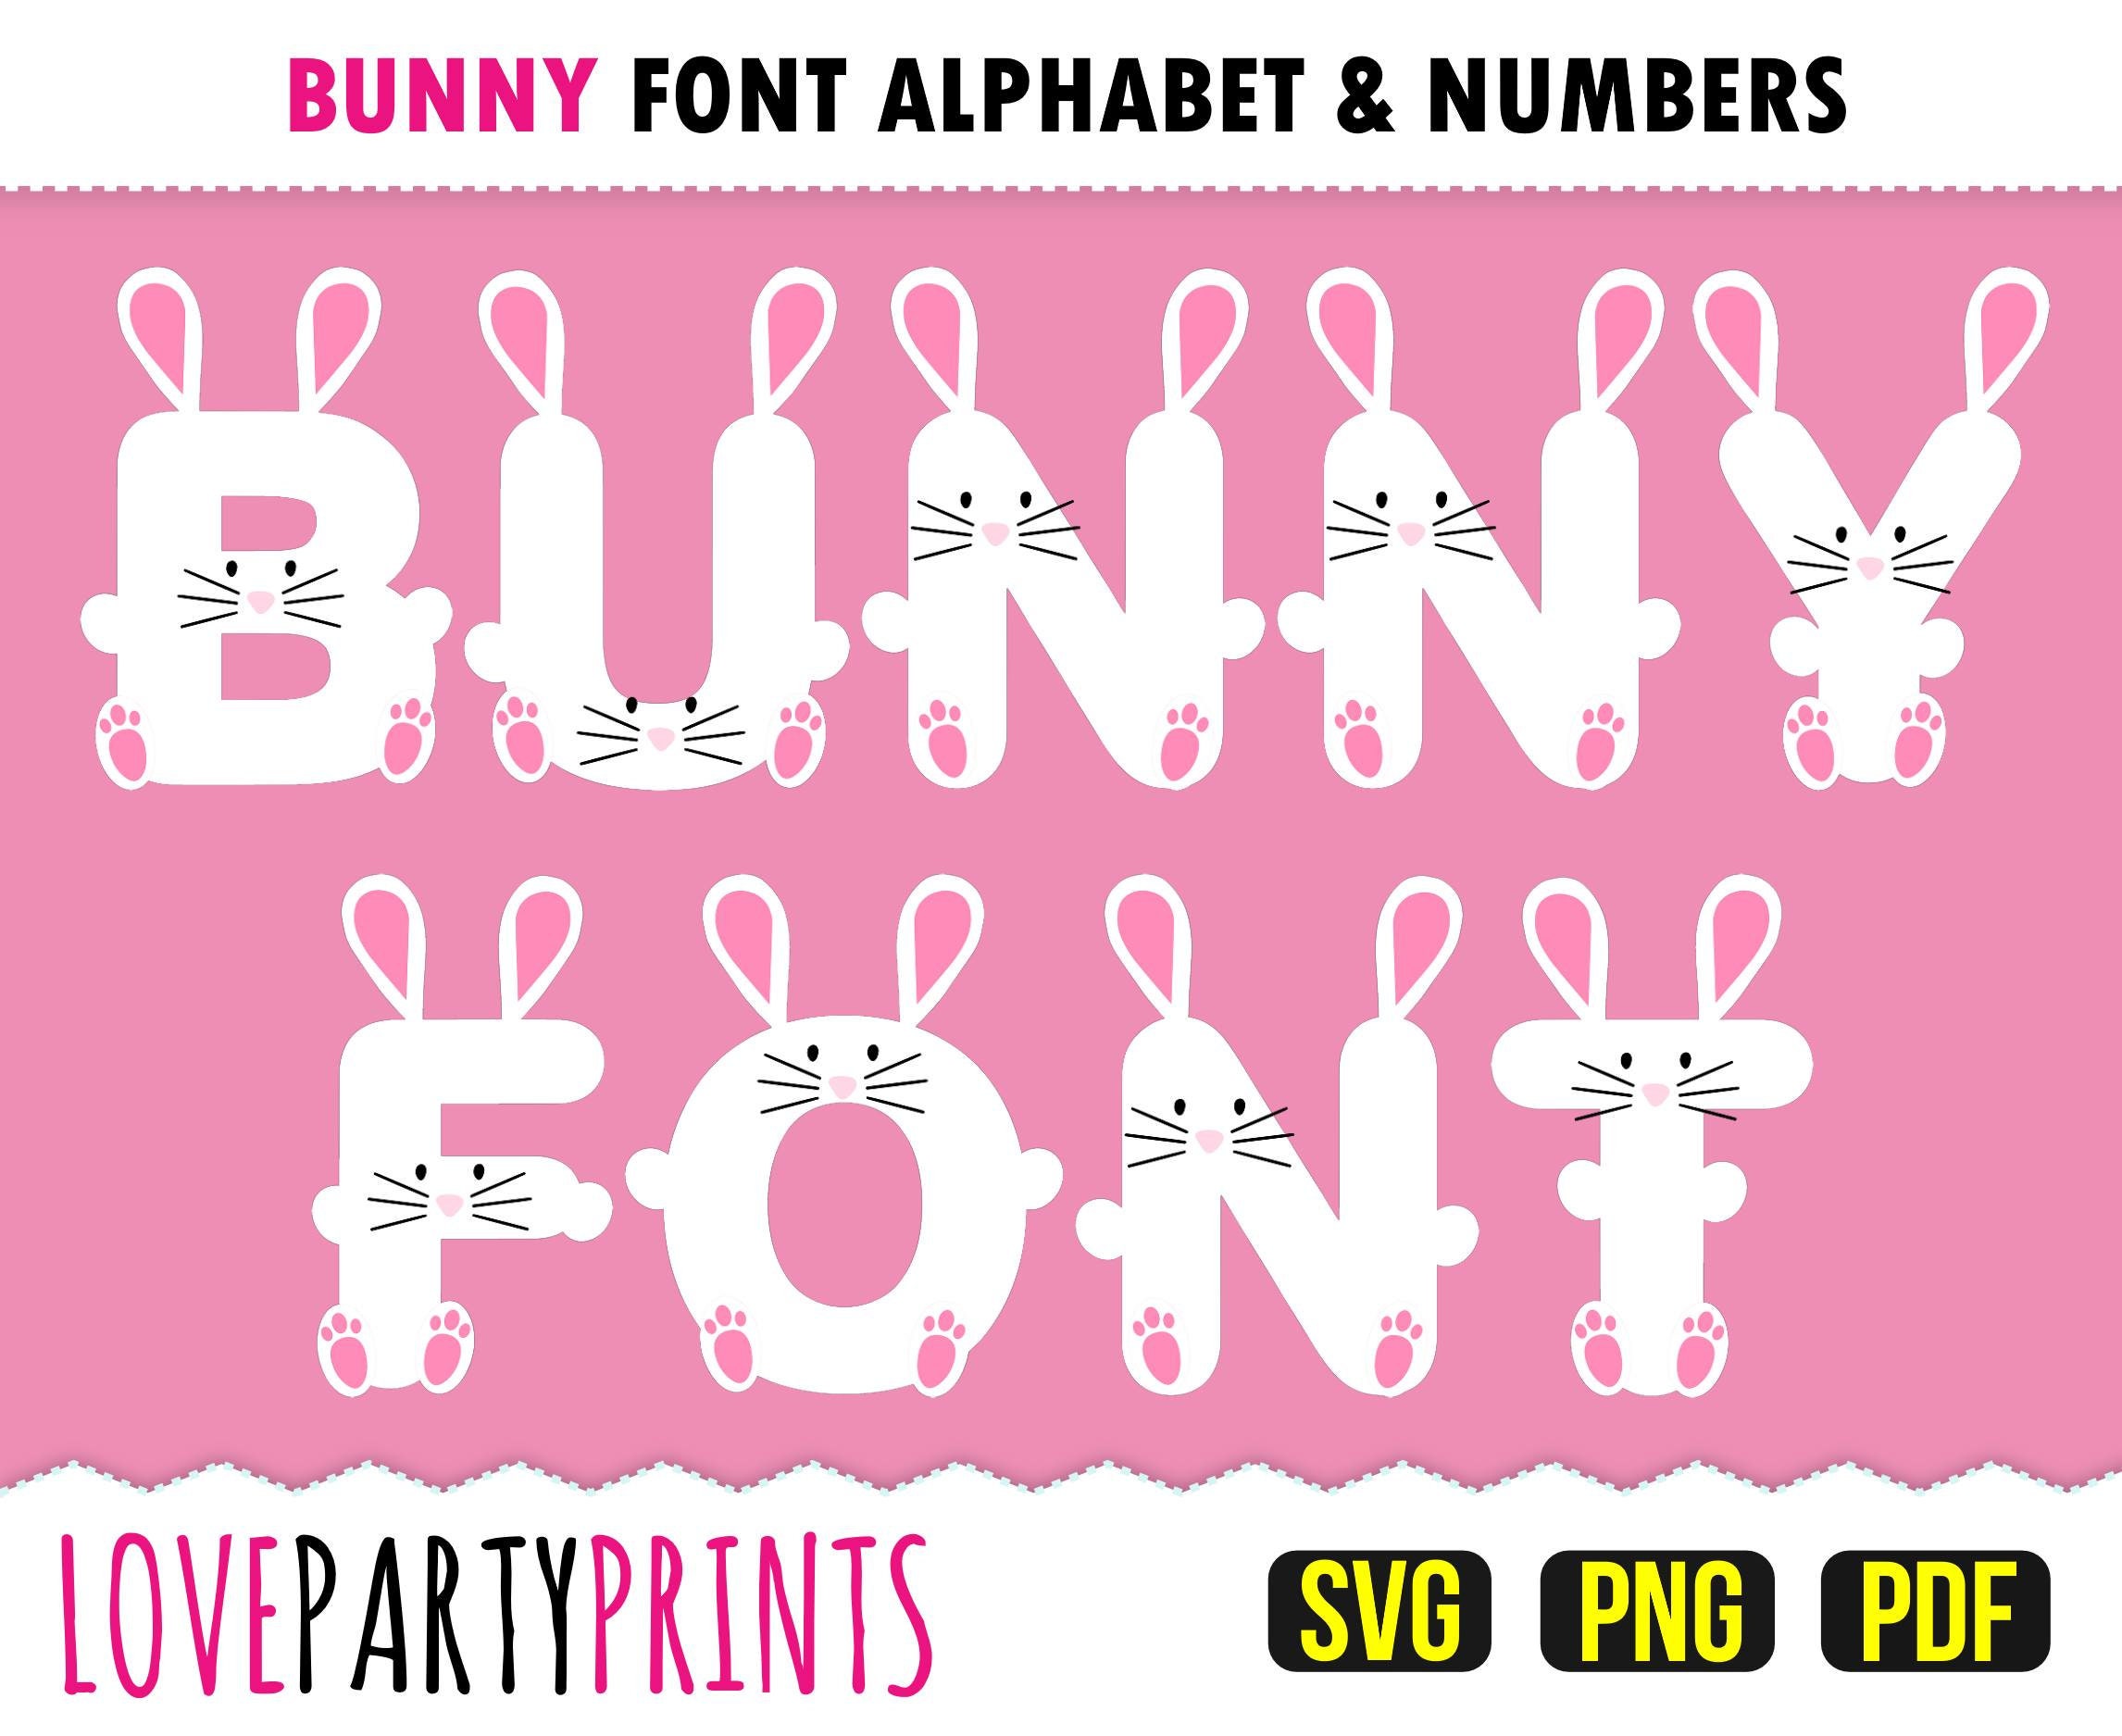 BUNNY FONT SVG and Png, Bunny Letters Svg, Bunny Numbers Svg, Easter Bunny  Svg, 300dpi High Quality, Create Your Own Banner, SVG1006 